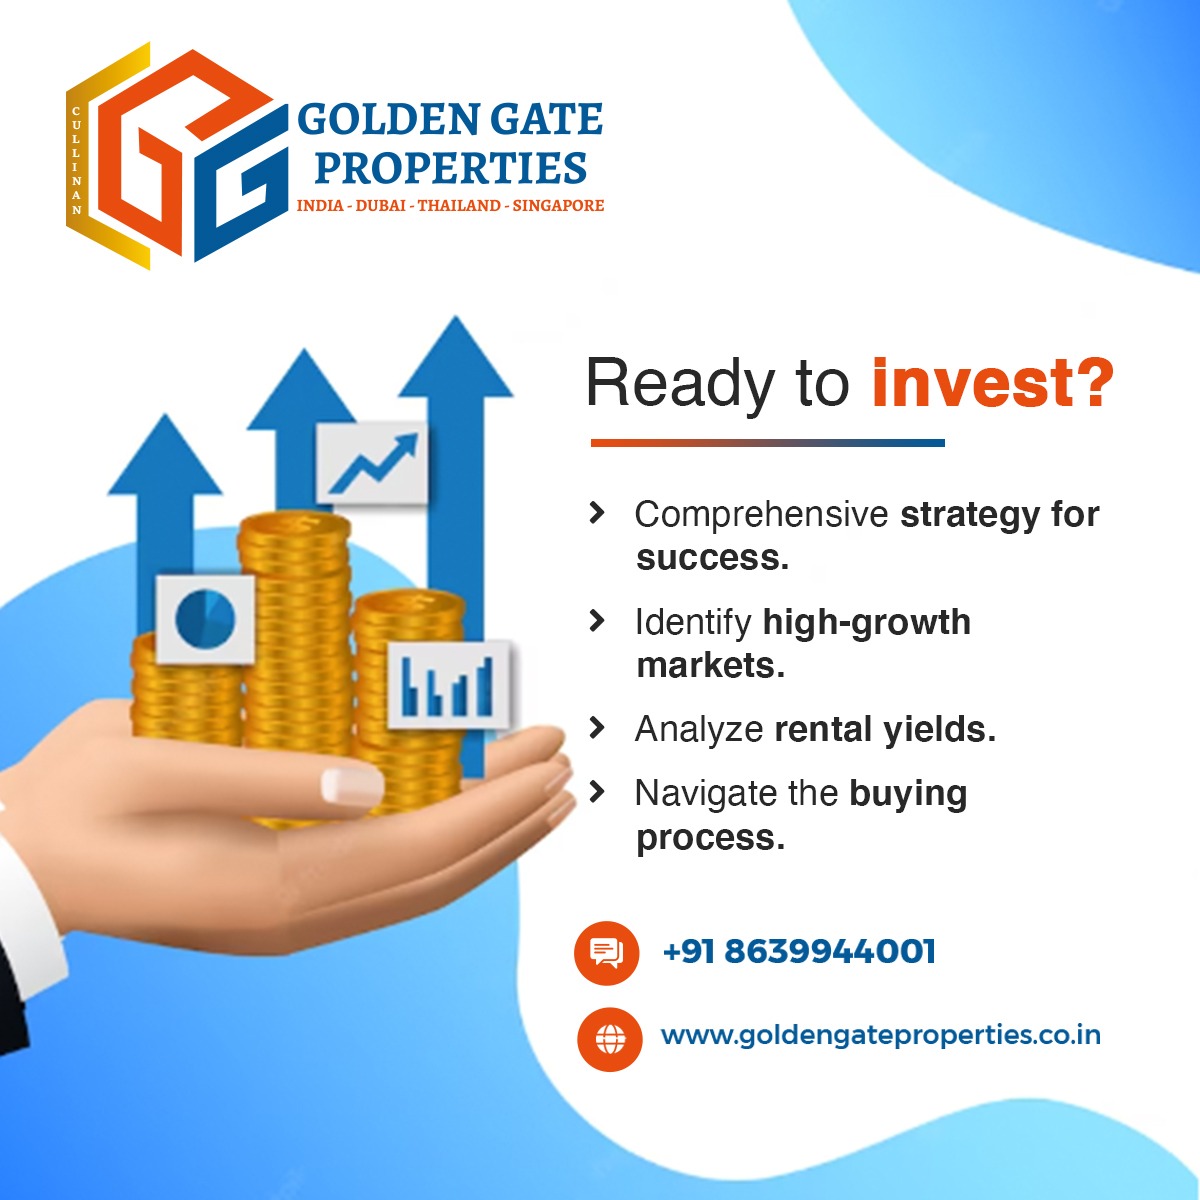 Visit Us@   goldengateproperties.co.in     #ReadyToInvest
#RealEstateEmpire
#ComprehensiveStrategy
#HighGrowthMarkets
#RentalYields
#BuyingProcess
#InvestmentSuccess
#InvestmentJourney
#RealEstateCommunity
#InvestmentOpportunities